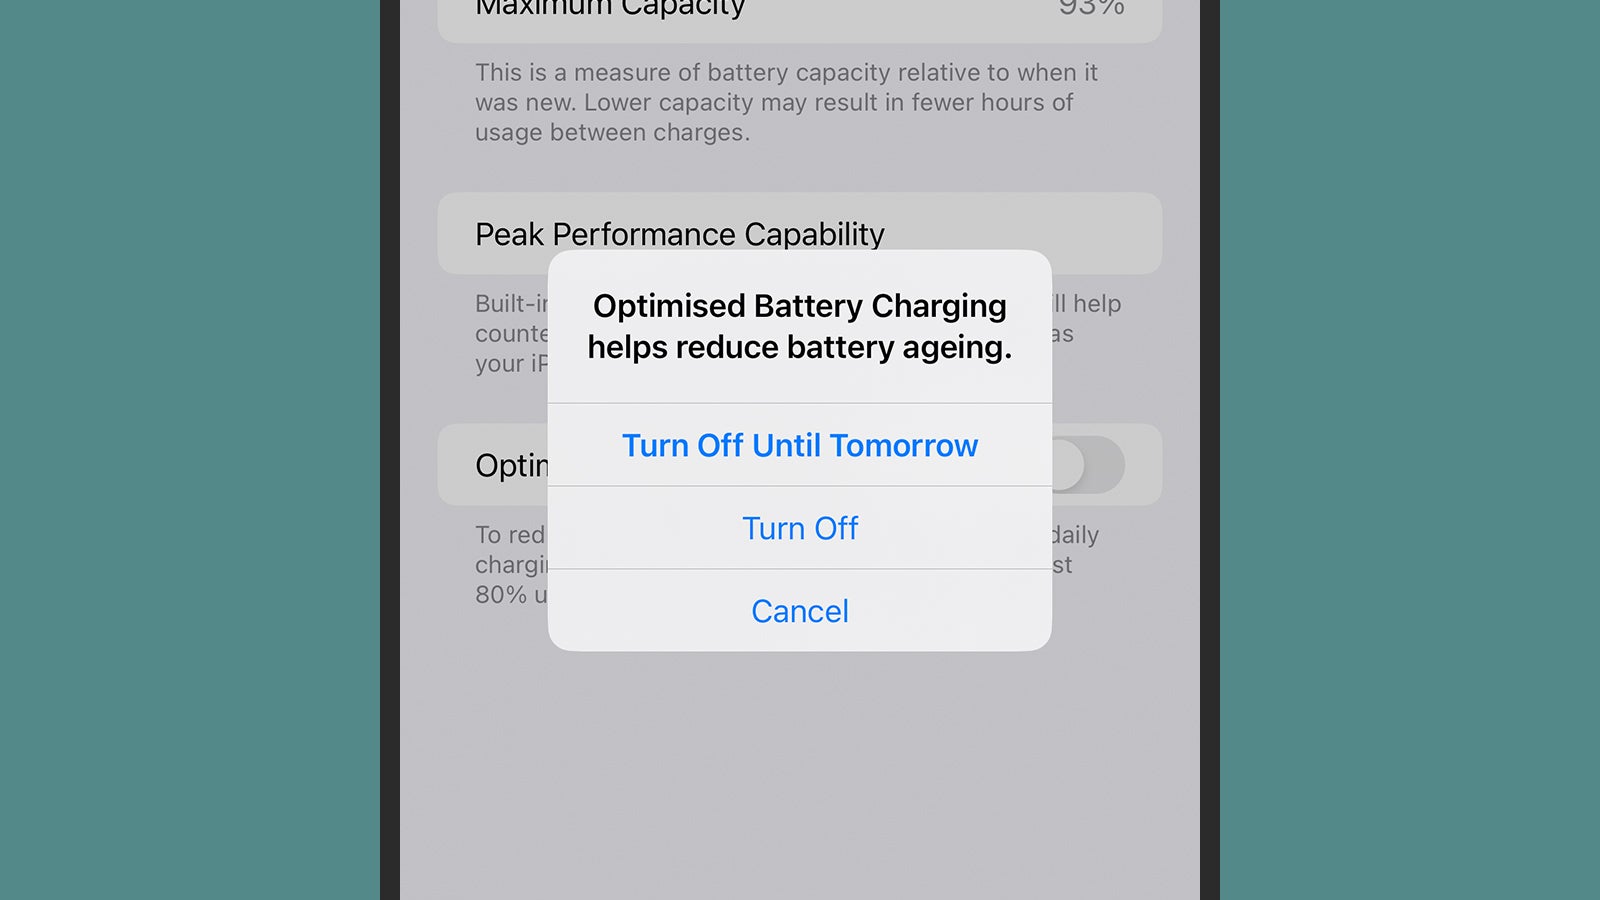 You can turn off optimised battery charging for a day or indefinitely. (Screenshot: iOS)